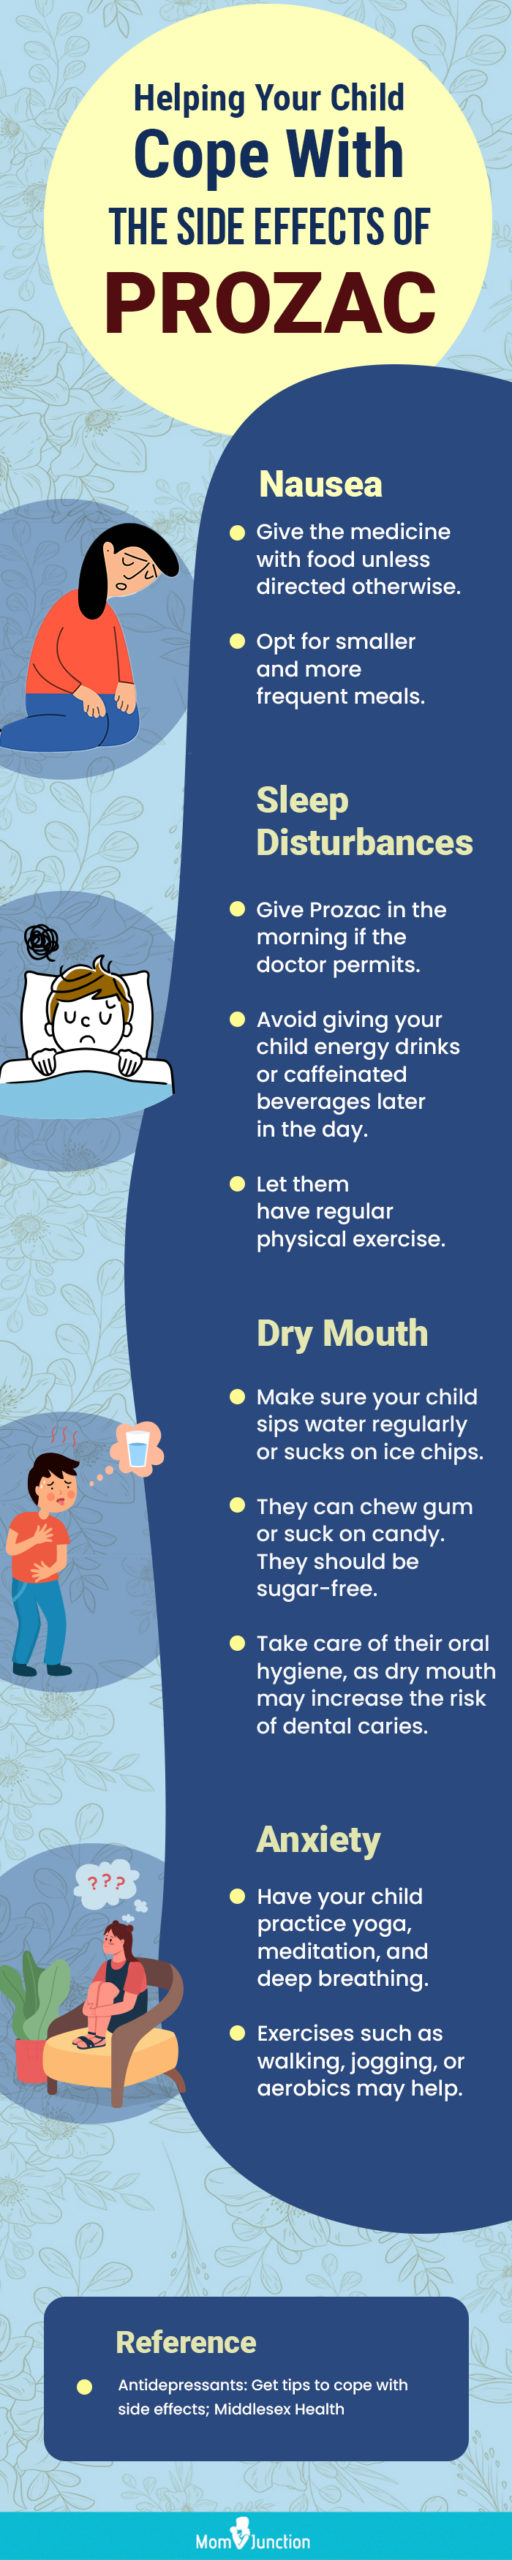 helping your child cope with the side effects of prozac (infographic)